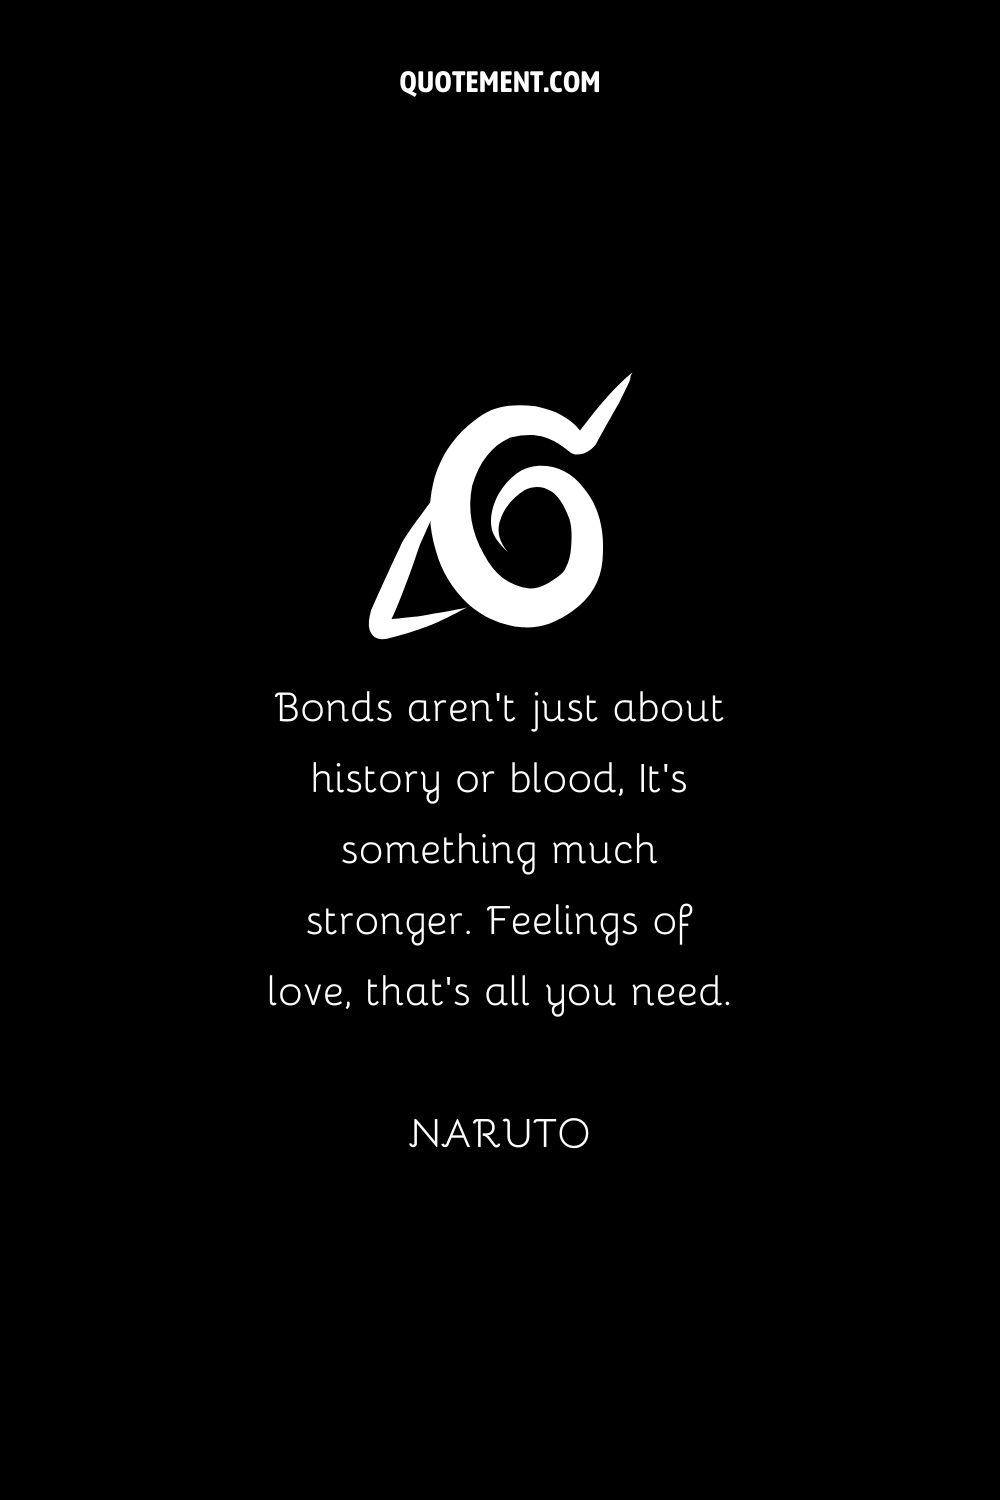 “Bonds aren’t just about history or blood, It’s something much stronger. Feelings of love, that’s all you need.” — Naruto